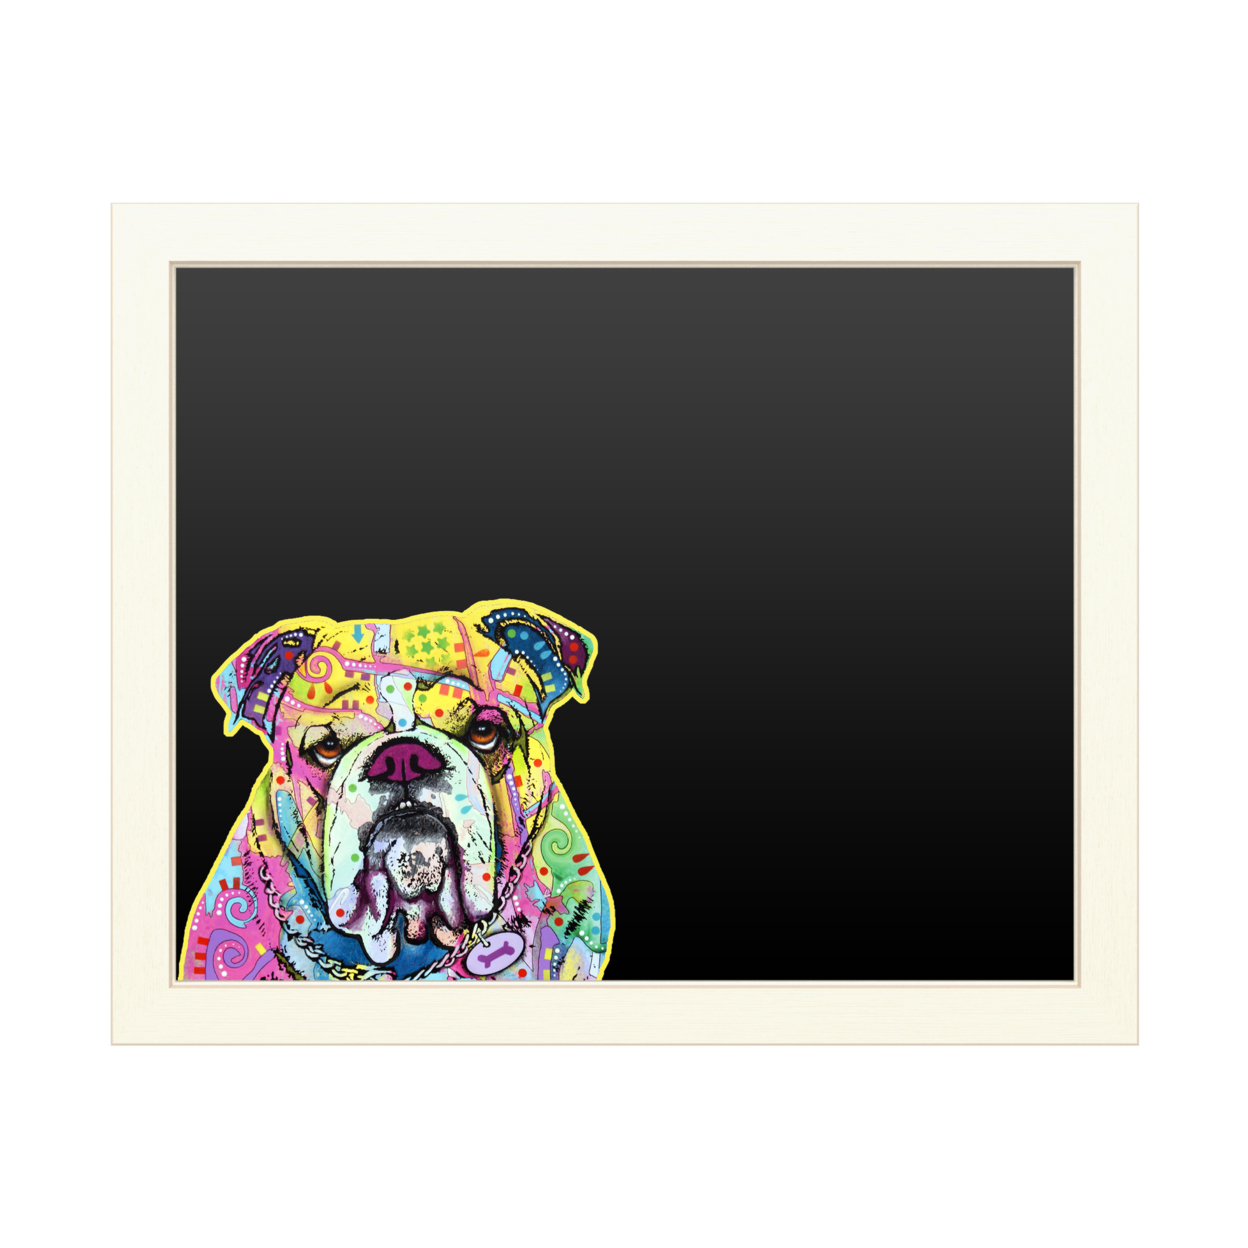 16 X 20 Chalk Board With Printed Artwork - Dean Russo The Bulldog White Board - Ready To Hang Chalkboard